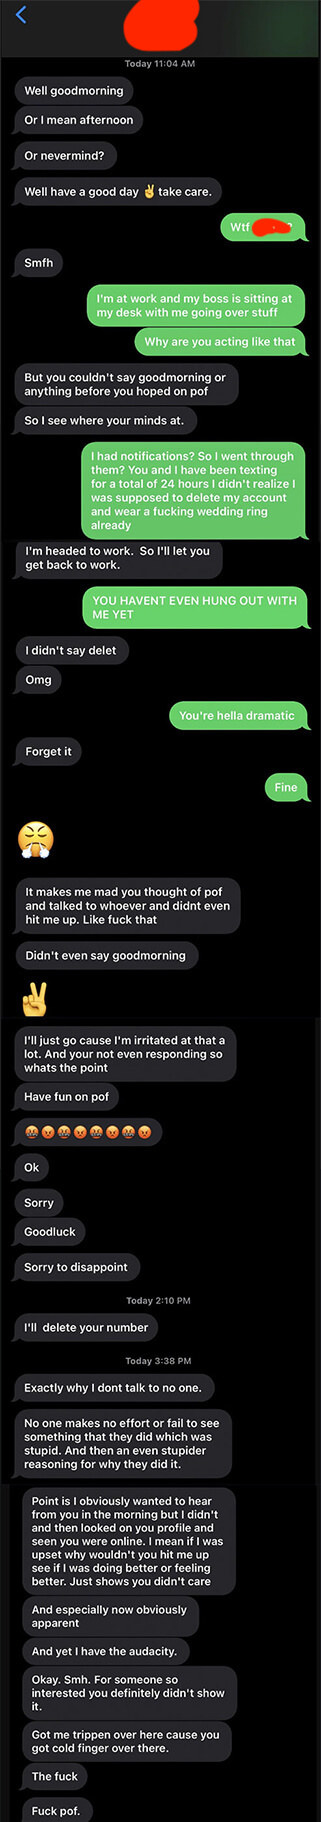 The man gets angry the woman didn&#x27;t text him to say good morning, she calls him dramatic, and he launches into a rant about what she should have done and how she should treat people